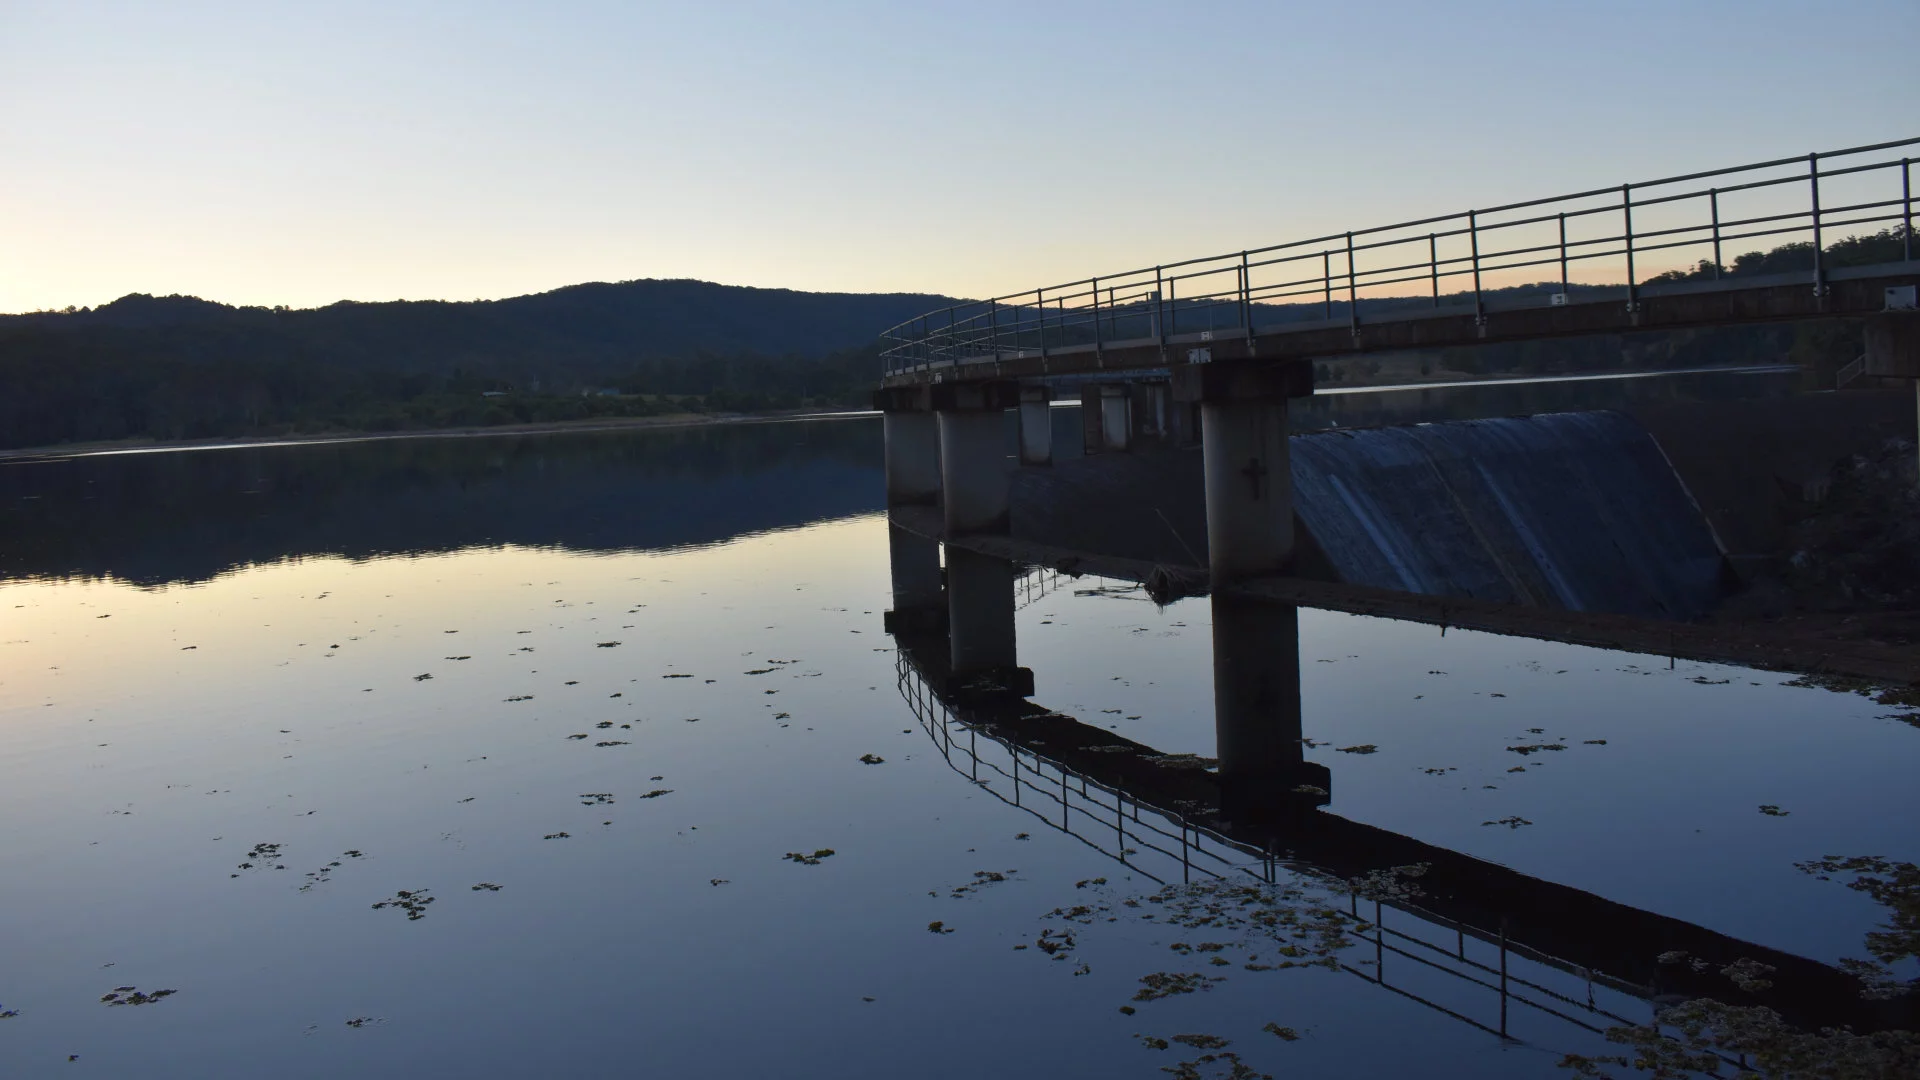 Late afternoon dam surface with mountain hills in the background and curved dam wall to the right, Wappa Dam near Yandina